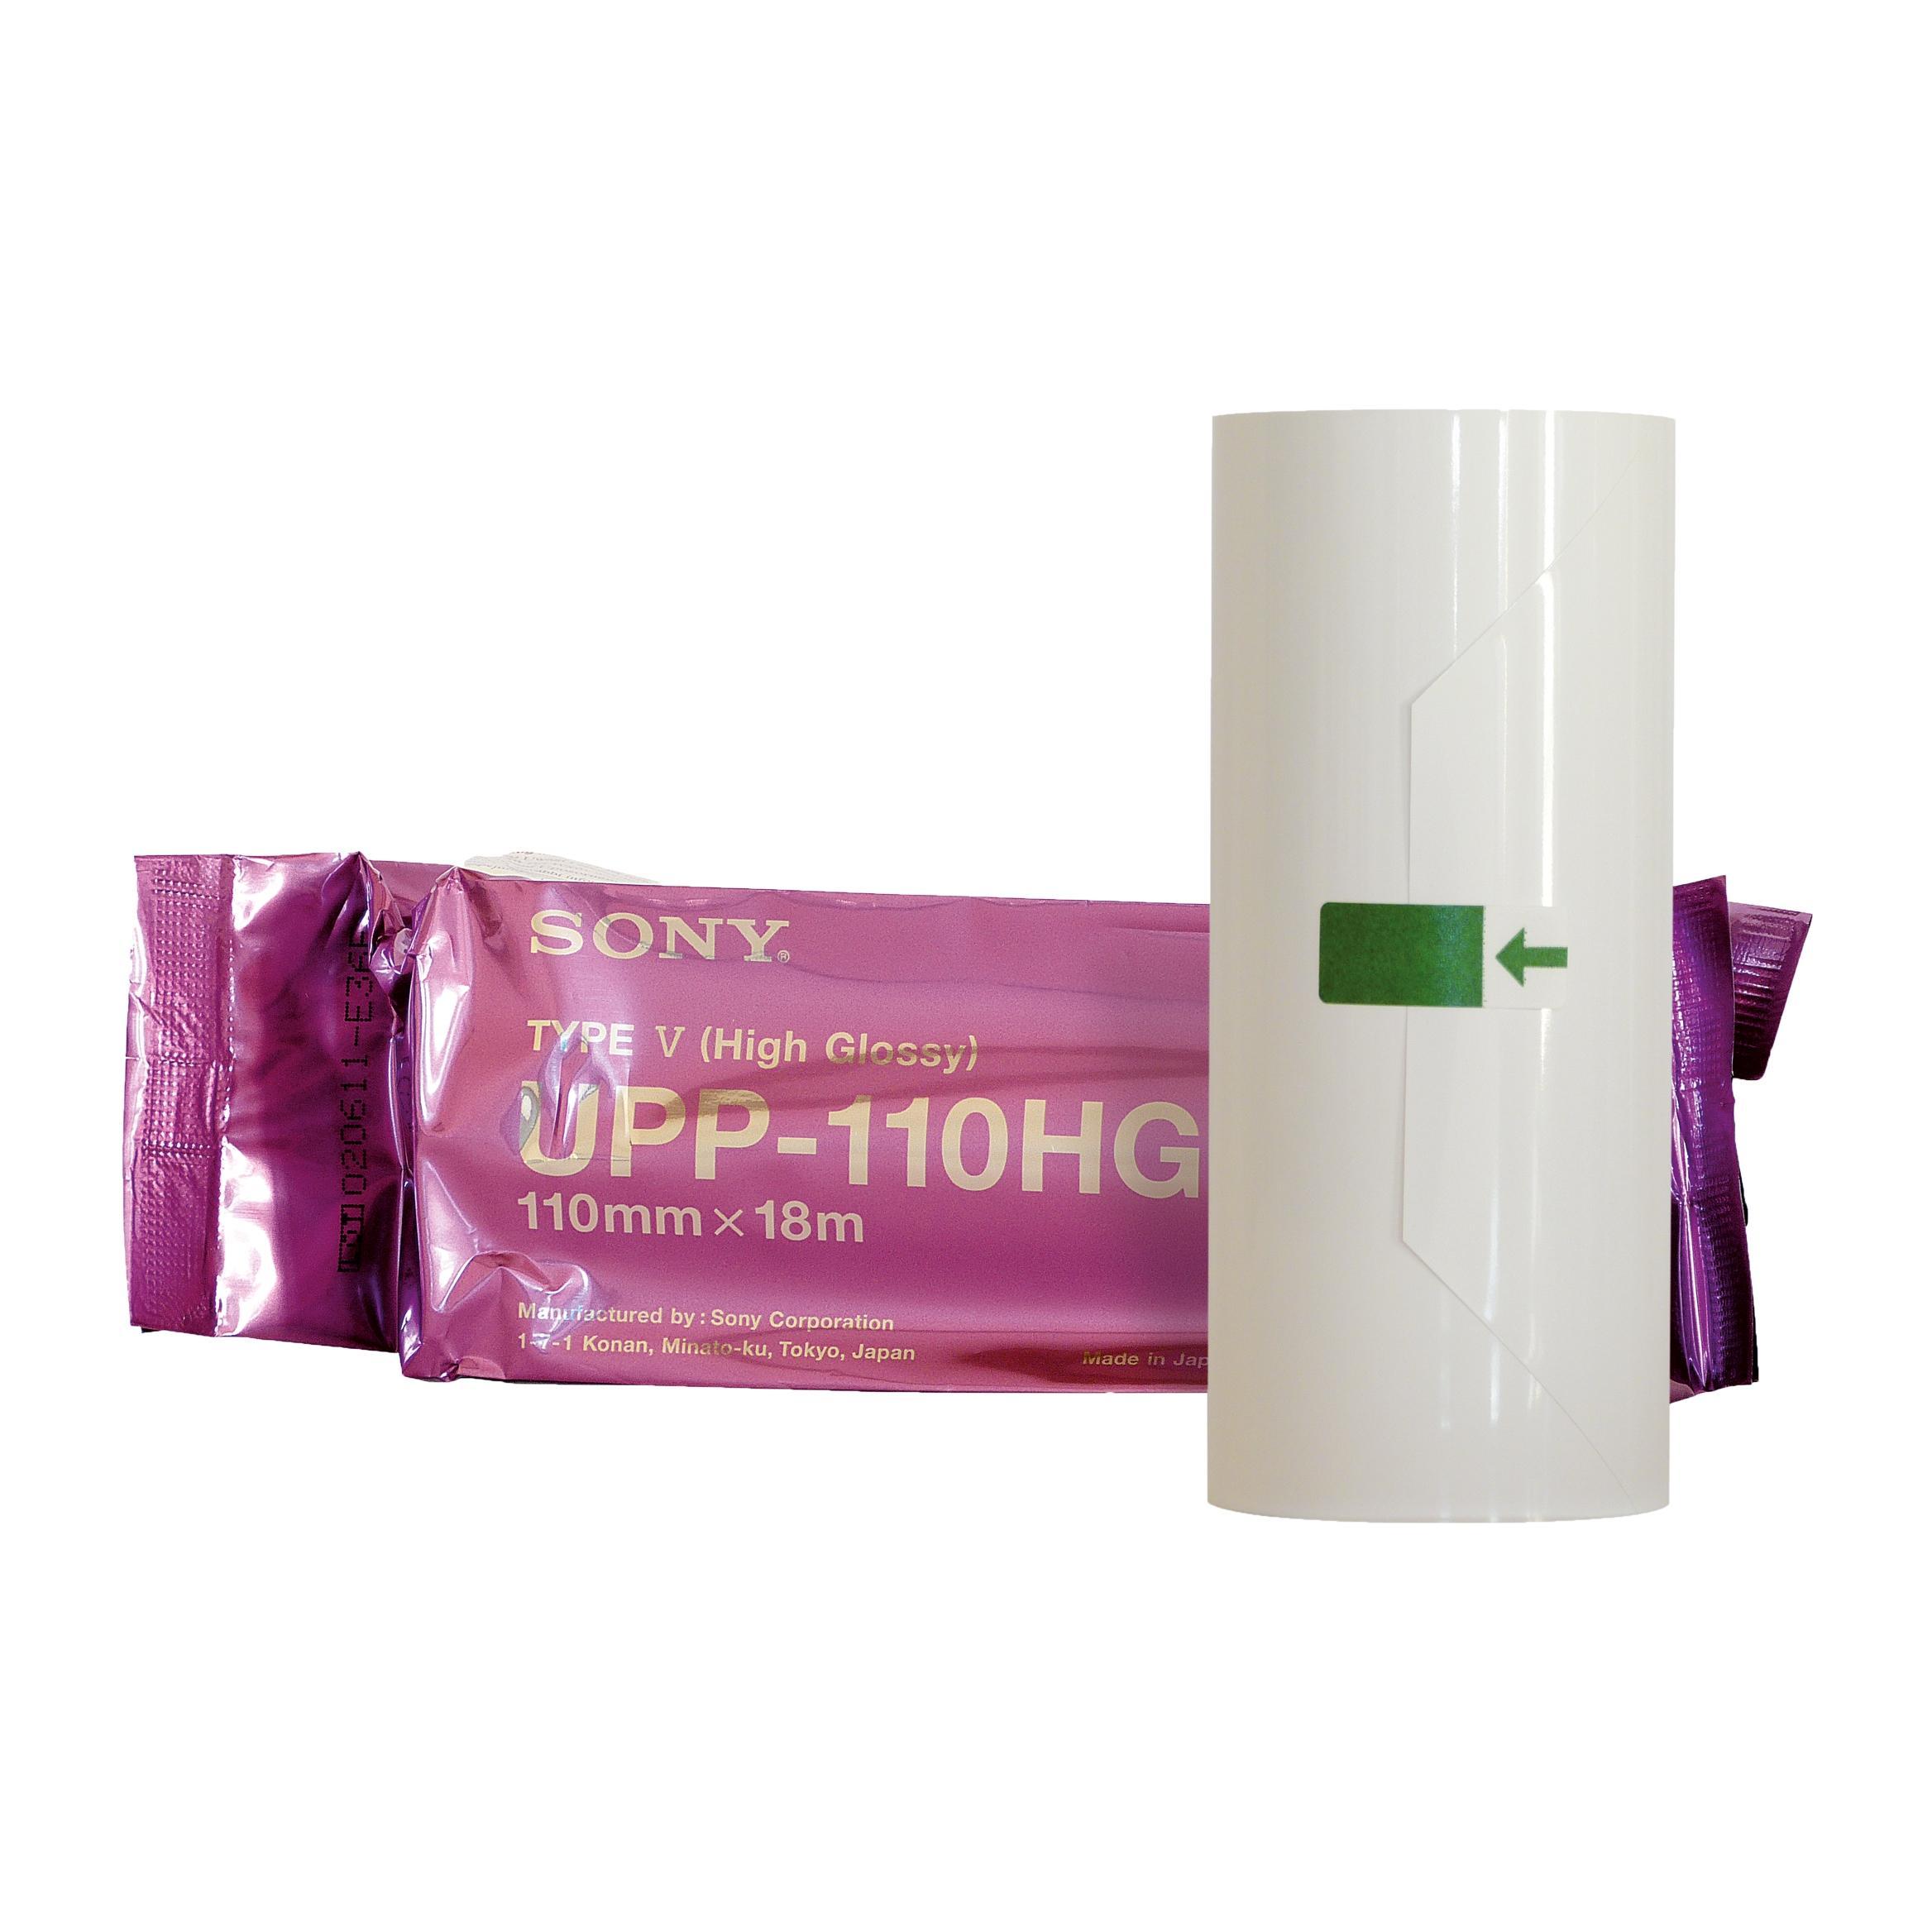 SONY® Medical Imaging Video Papers